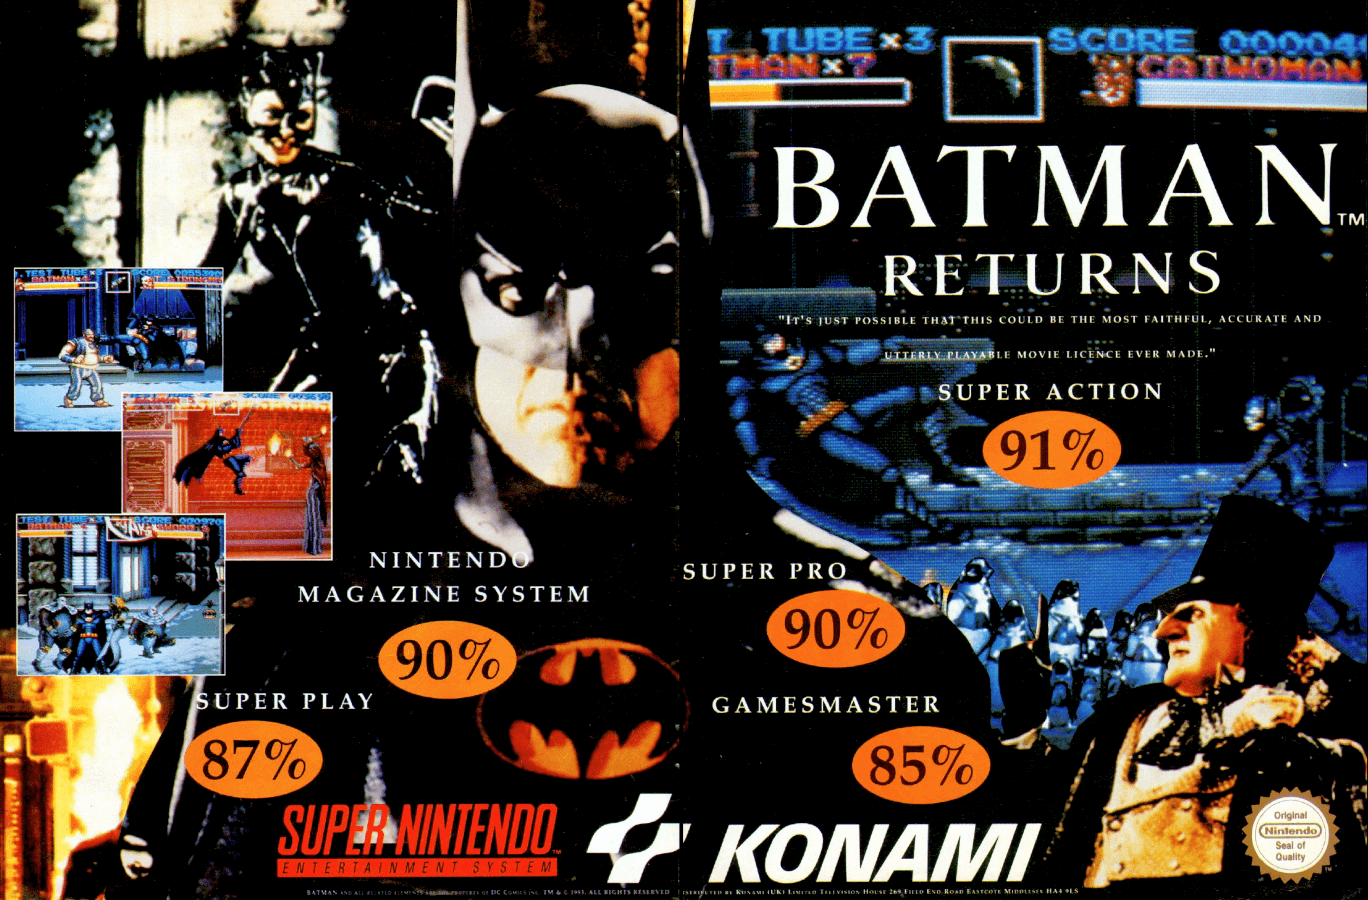 Image For Post | **Description**  
The successful movie sequel Batman Returns spawned many different game adaptations. The SNES version presents the story of Batman's encounter with the Penguin and Catwoman as a side-scrolling beat'em'up, with one Batmobile driving sequence thrown in.

There are two varieties of the beat'em'up levels. One plays like Final Fight [https://imgur.com/a/fubsjUy] and similar games: Batman can move in two dimensions, beating up his enemies with various punches, kicks, combos and special moves. Special gadgets to be used include the famous Batarang to take out enemies from a distance and "Test Tubes" filled with chemical explosives which will damage all enemies on the screen.

In the second type of side-scrolling level, Batman can only move in one dimension, left or right. The Batarang is the standard weapon here, with punches only being used when the enemy gets close. Also in these levels, Batman can use a grappling hook to cross dangerous areas unharmed.

Enemies in the beat'em'up levels usually belong to the Penguin's Red Triangle Circus Gang - clowns in all varieties: thin clowns, fat clowns, clowns on bikes, clowns armed with bazookas, and more. At the end of each level there is a boss fight, including several encounters with Catwoman and the Penguin.

In the Batmobile driving level, the action is viewed from behind. Batman has to evade clowns on bikes and shoot them down when he gets the chance. At the end of the road, another boss fight awaits.

Digitized images from the film illustrate the storyline. 

**NES version**  
The NES version of the game is also a beat 'em up game, but closer in style and gameplay to the Double Dragon series. The player only has one life bar (which can be expanded through health packs). It implements a password-save system. Of special note are the two side-scrolling racing levels in which the player controls the Batmobile and the Batskiboat. The music was composed by Shigemasa Matsuo and Takashi Tateishi.

**Sega 16-bit versions**  
The Sega Genesis/Mega Drive and Sega CD versions of the game are more or less identical, as they are both two-dimensional platforming games similar in design to Sega's previous movie-based Batman game. The Genesis version of the game was released on December 29, 1992, during the same time Ecco the Dolphin was released for the Sega Megadrive as well. The CD version of the game features a number of 3D racing levels that took advantage of the graphics hardware provided by the Mega-CD unit, plus improved music in the form of CD audio with a number of animations featuring original artwork (not film photos). While different versions follow the movie's plot from start to finish, the Sega versions start after The Penguin kills the Ice Princess and puts the blame on Batman for killing her, as shown in the game's introductions. 

**Sega 8-bit versions**  
The Sega Master System and Sega Game Gear versions of the game are side-scrolling platform games. However, the titles were created independently of the 16-bit versions. This version featured a unique branched level system, allowing players to choose from an easy and difficult route. The latter typically forced players to use rope swinging to navigate over large floorless areas in these versions of levels. 

**Atari Lynx version**  
The Atari Lynx version is a 2D side-scroller consisting of four levels. The first level you face the Circus Gang with Penguin as the end level boss. The second level you face the police on the roof tops with Catwoman as the end level boss. The third level you have to defeat Penguin's forces in the sewer, while the four level is titled "Arctic World" where you face Penguin for the final time. The game was developed in-house by Atari-Eypx produced by John Skruch with the main programmers being Jerome Starch and Eric Ginner.[1] There was an Atari Lynx II release which came with Batman Returns.

**DOS version**  
The DOS version of the game, published by Konami, differs considerably from the other versions, in that it was not primarily an action game, rather an adventure game. 

**Amiga version**  
The Amiga version of the game was a subject of considerable controversy. Gametek had, prior to the game's release, sent a number of screenshots derived from the PC title to market the game. As such, a number of computer magazines previewed the game as a direct conversion of the PC adventure. The reality, however, was very different. The game was, contrary to expectations, not a conversion of the PC title, but a side-scrolling platform game akin to the console games. It was plagued with bugs, including very inaccurate collision detection. 

**Music - SNES**  
This was the only Batman Returns game to make full use of Danny Elfman's film score. All other versions of the game use music created specifically for the game. 

**Endings - SNES**  
Depending how well and on which difficulty the game is played, players can get multiple endings for completing the title. Playing on the hardest difficulty is the only way to get the longest and full ending. 

**Alternate Titles**  
    "バットマンリターンズ" -- [SNES/Super Famicom] Japanese spelling